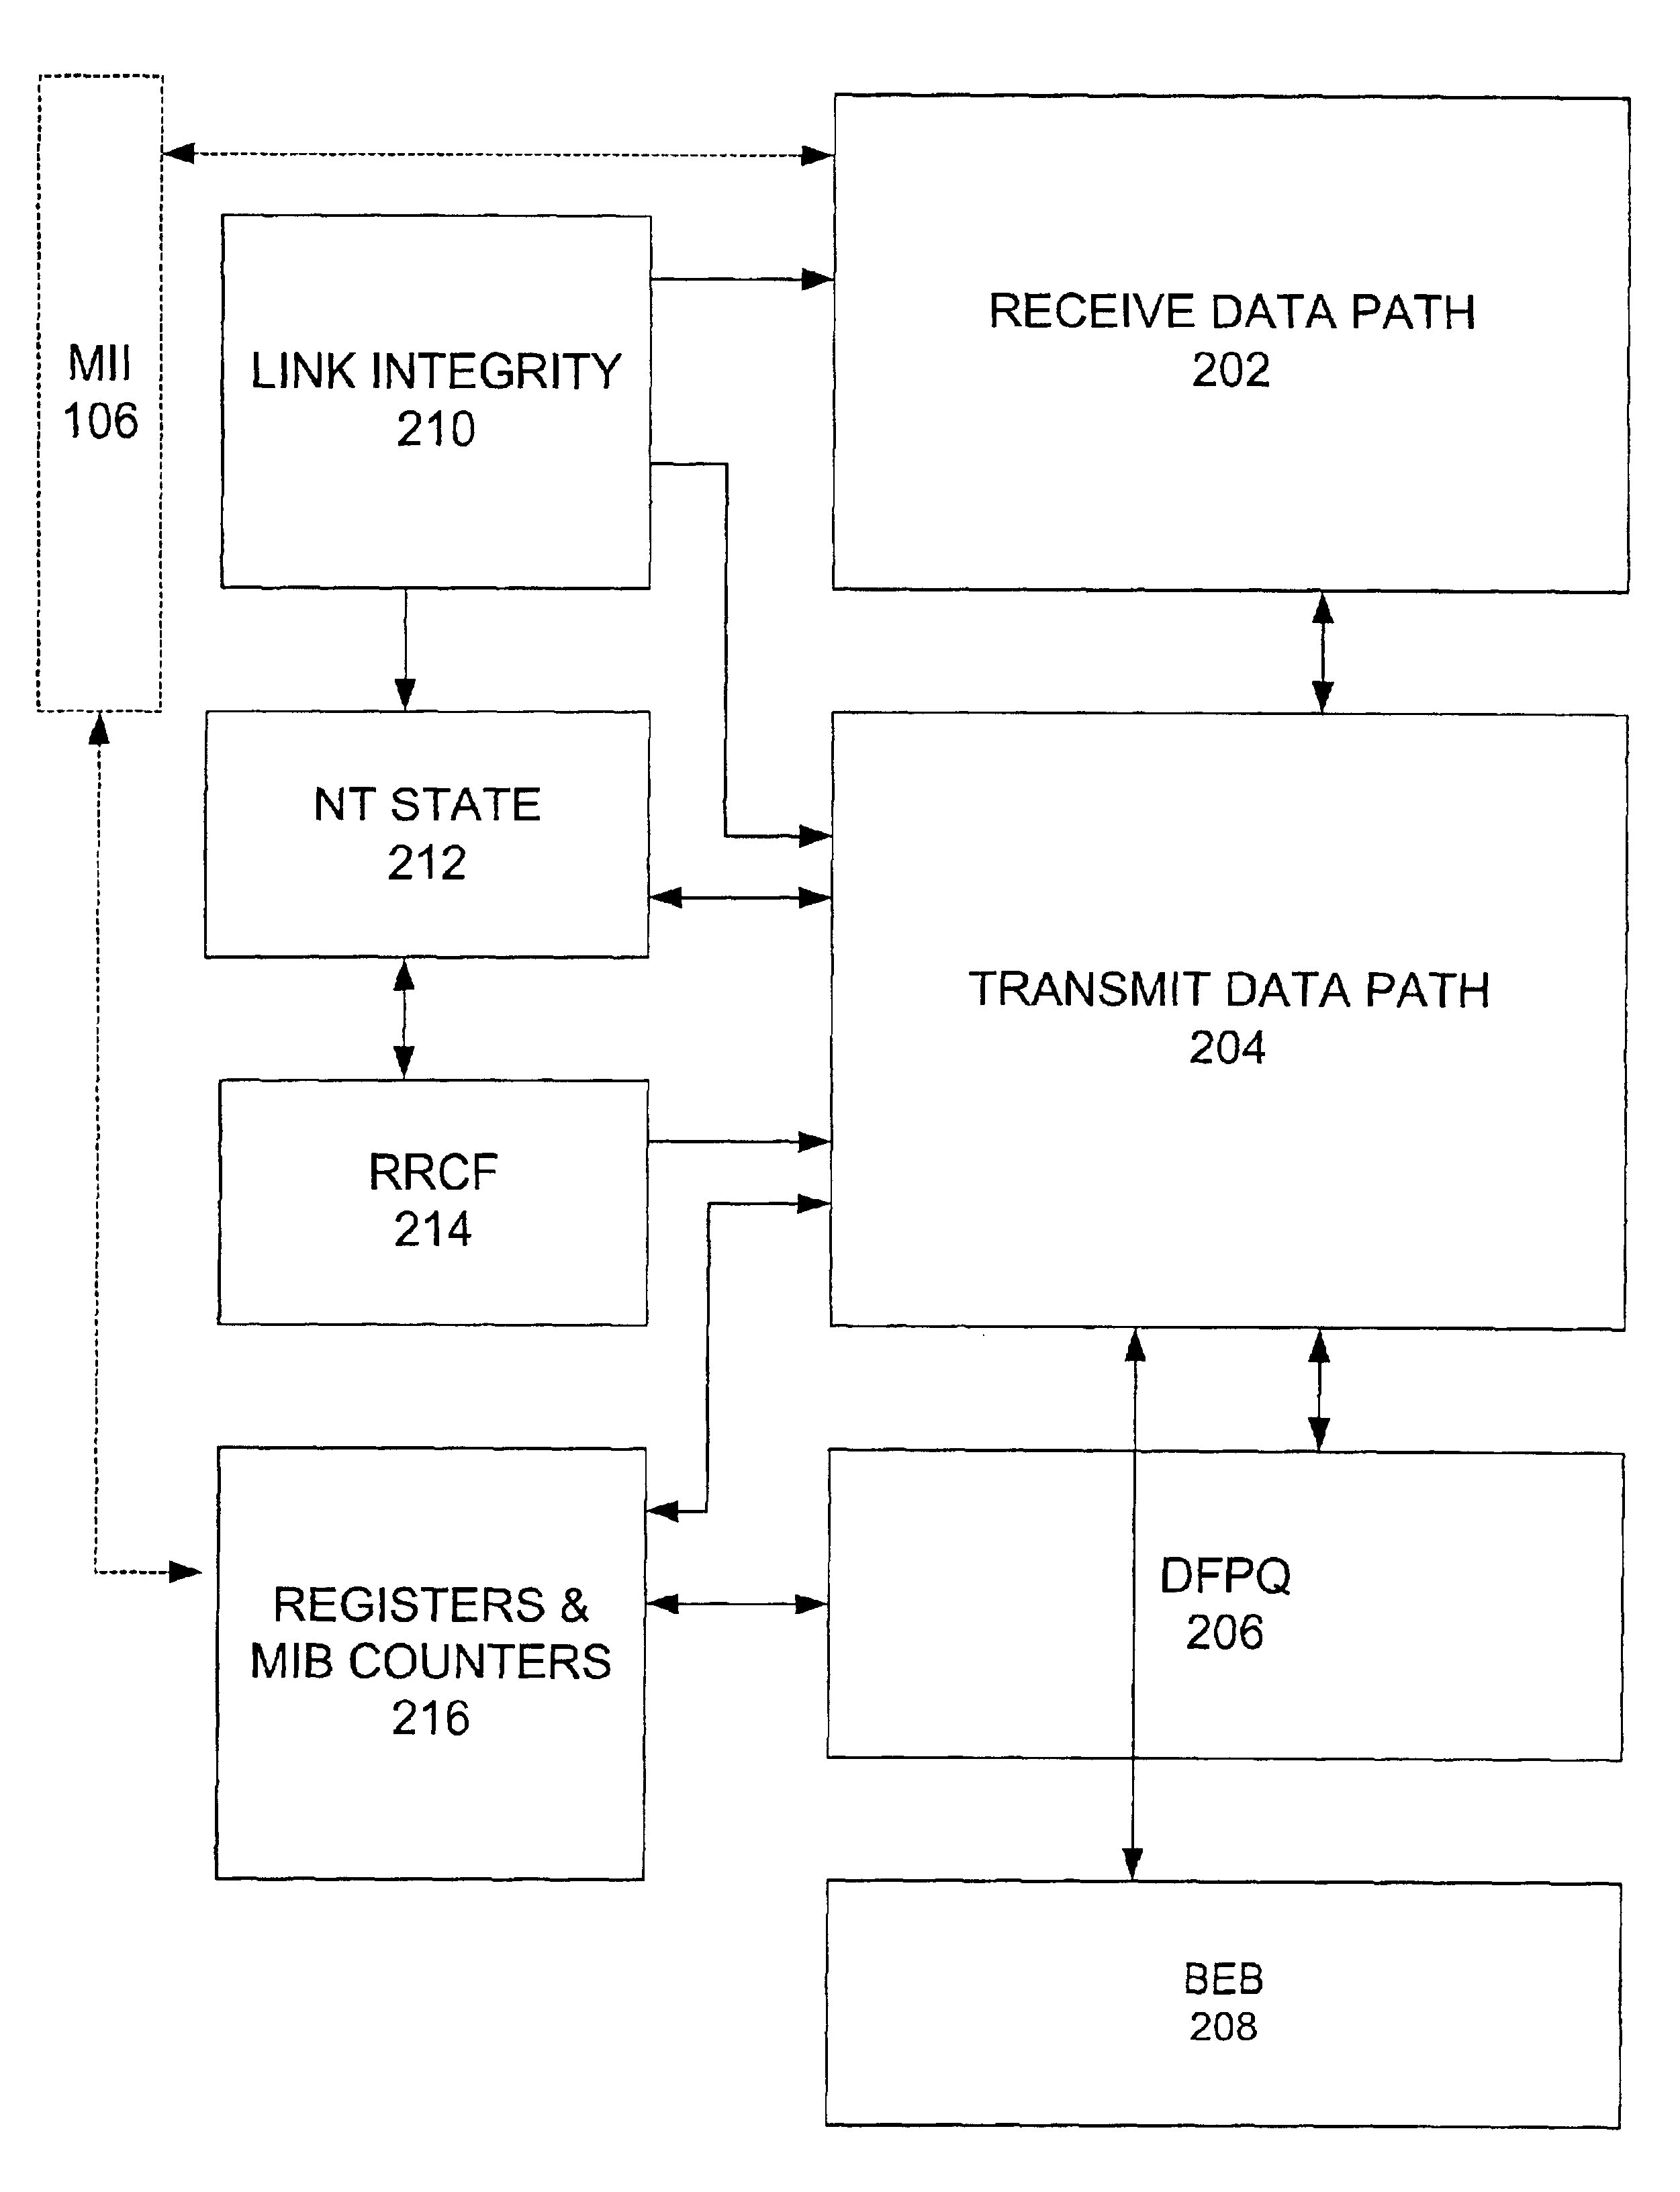 Mechanism to consolidate HPNA three network states into two network states